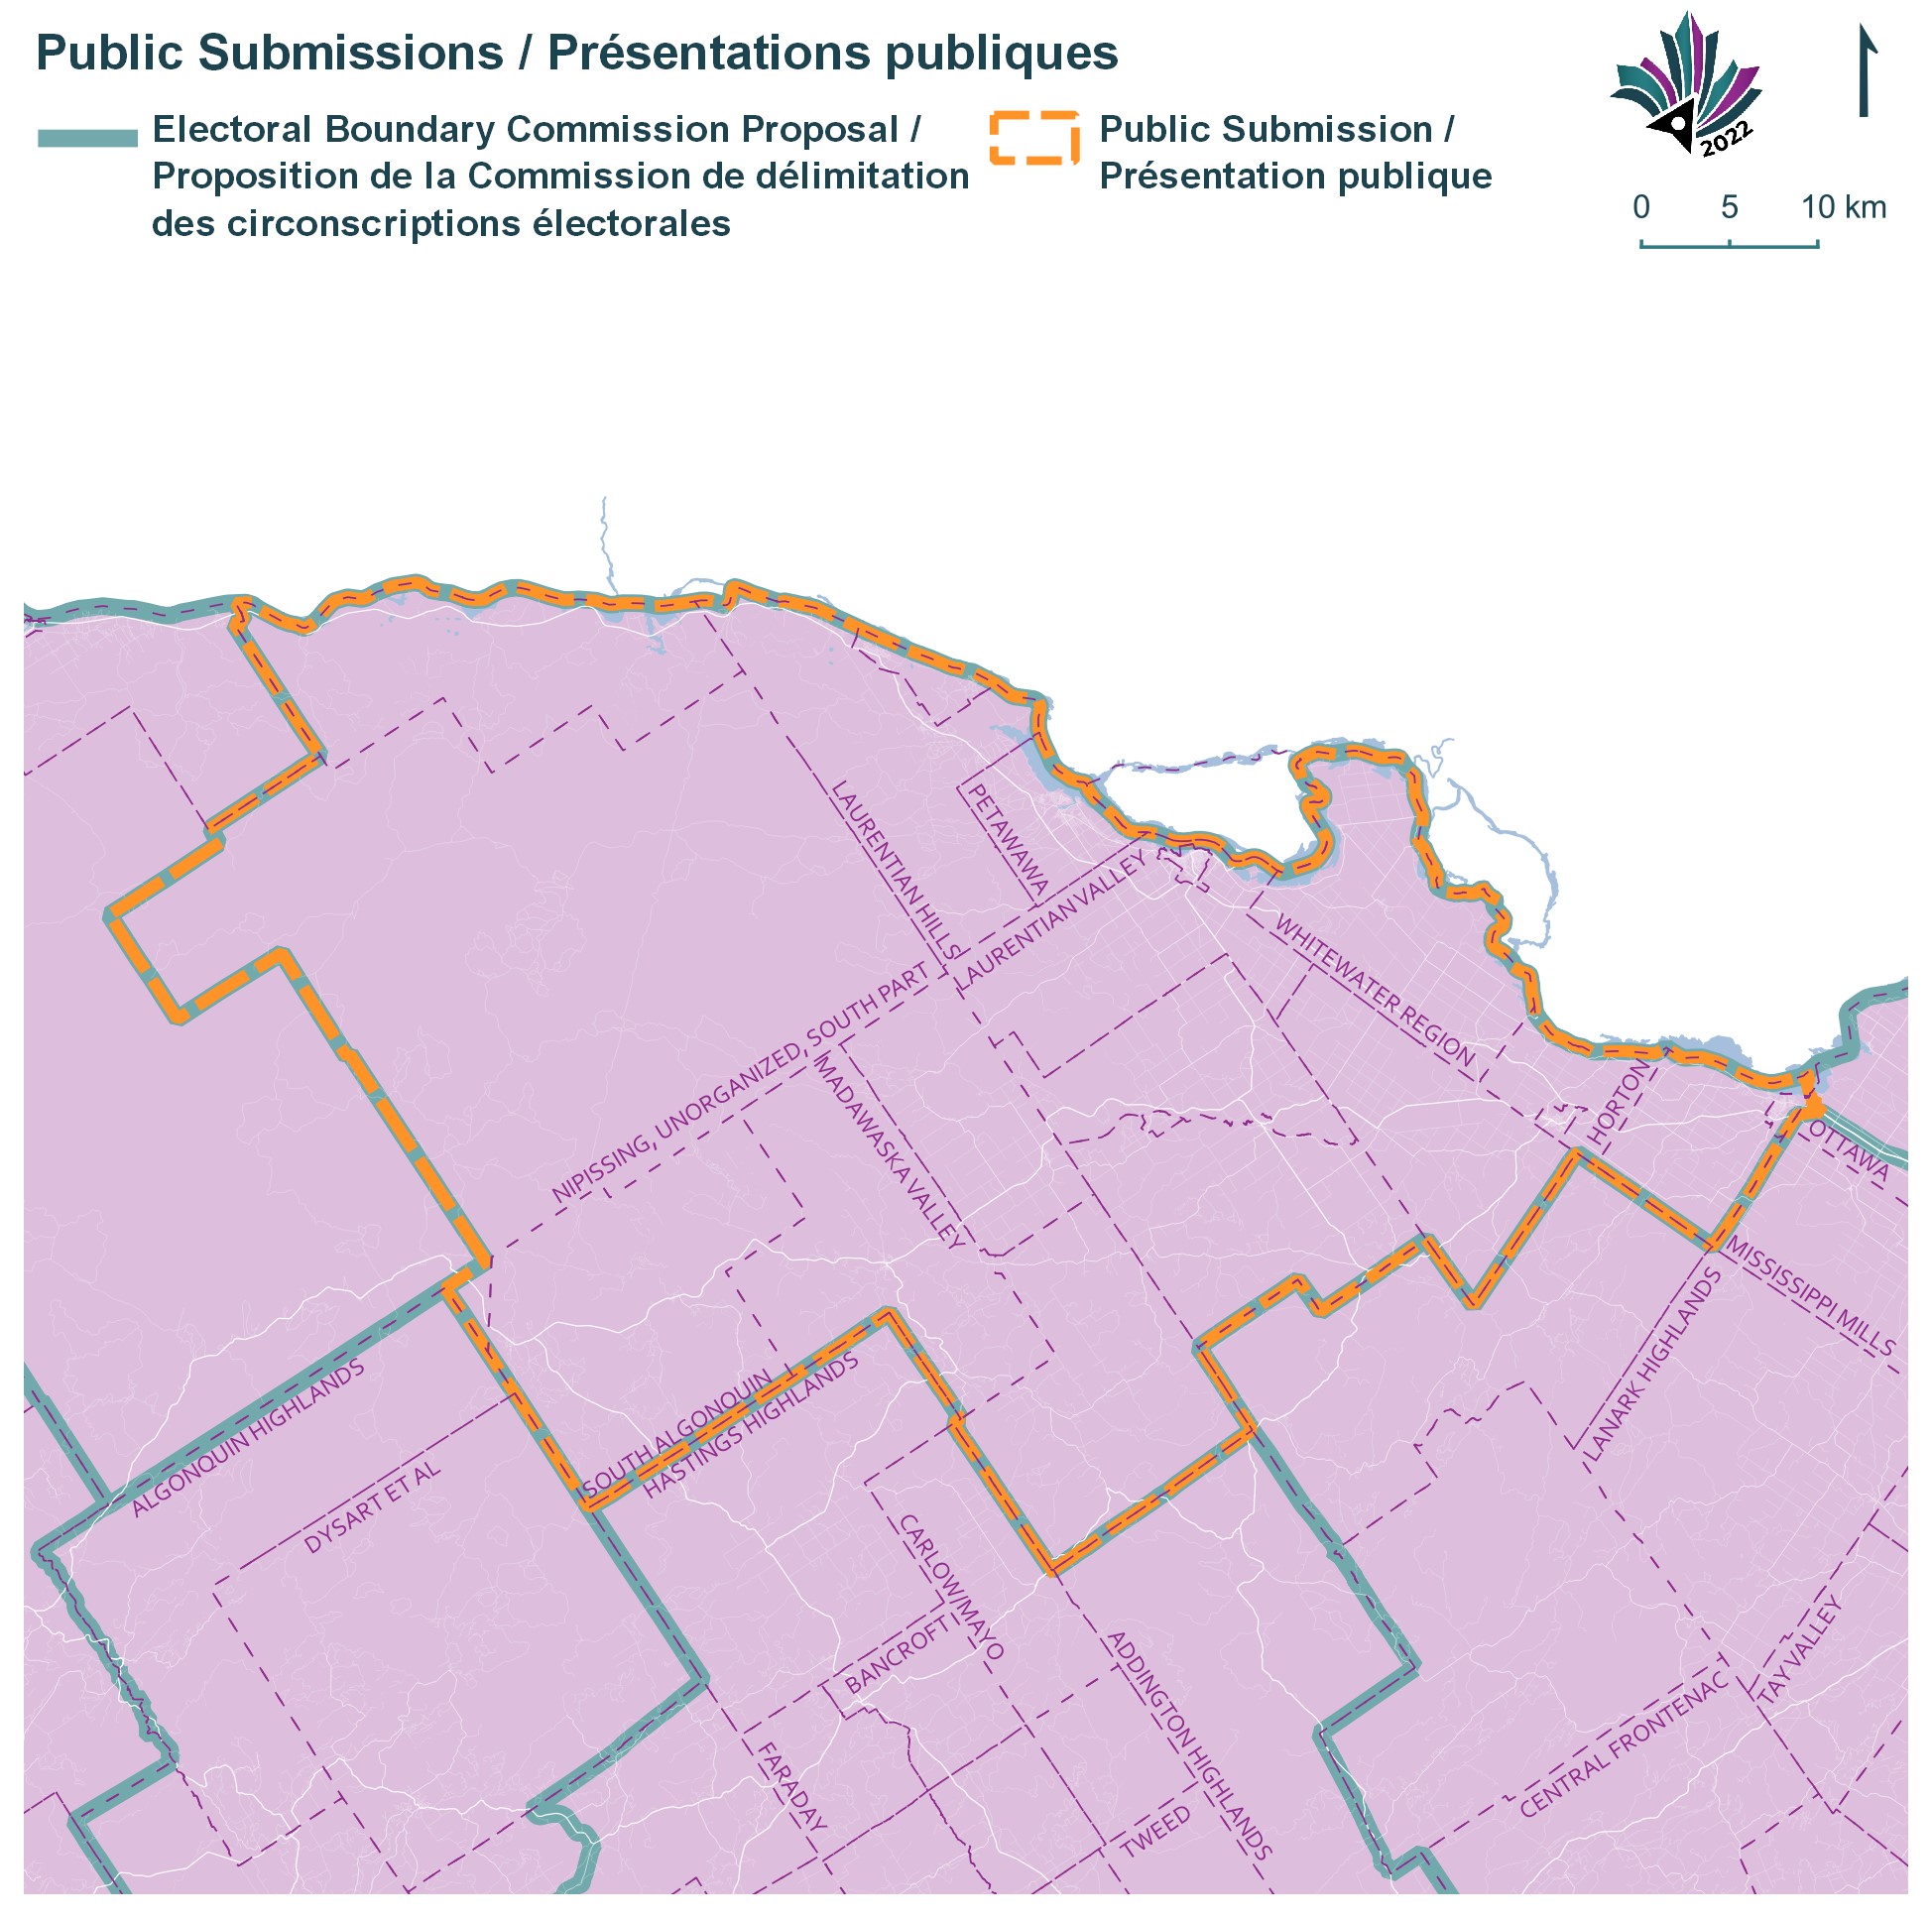 This map shows modifications to the boundaries of the proposed electoral district that the Federal Electoral Boundaries Commission for Ontario calls Algonquin–Renfrew–Pembroke. The solid green line is the Electoral Boundary Commission Proposal and the dashed orange is a public submission.